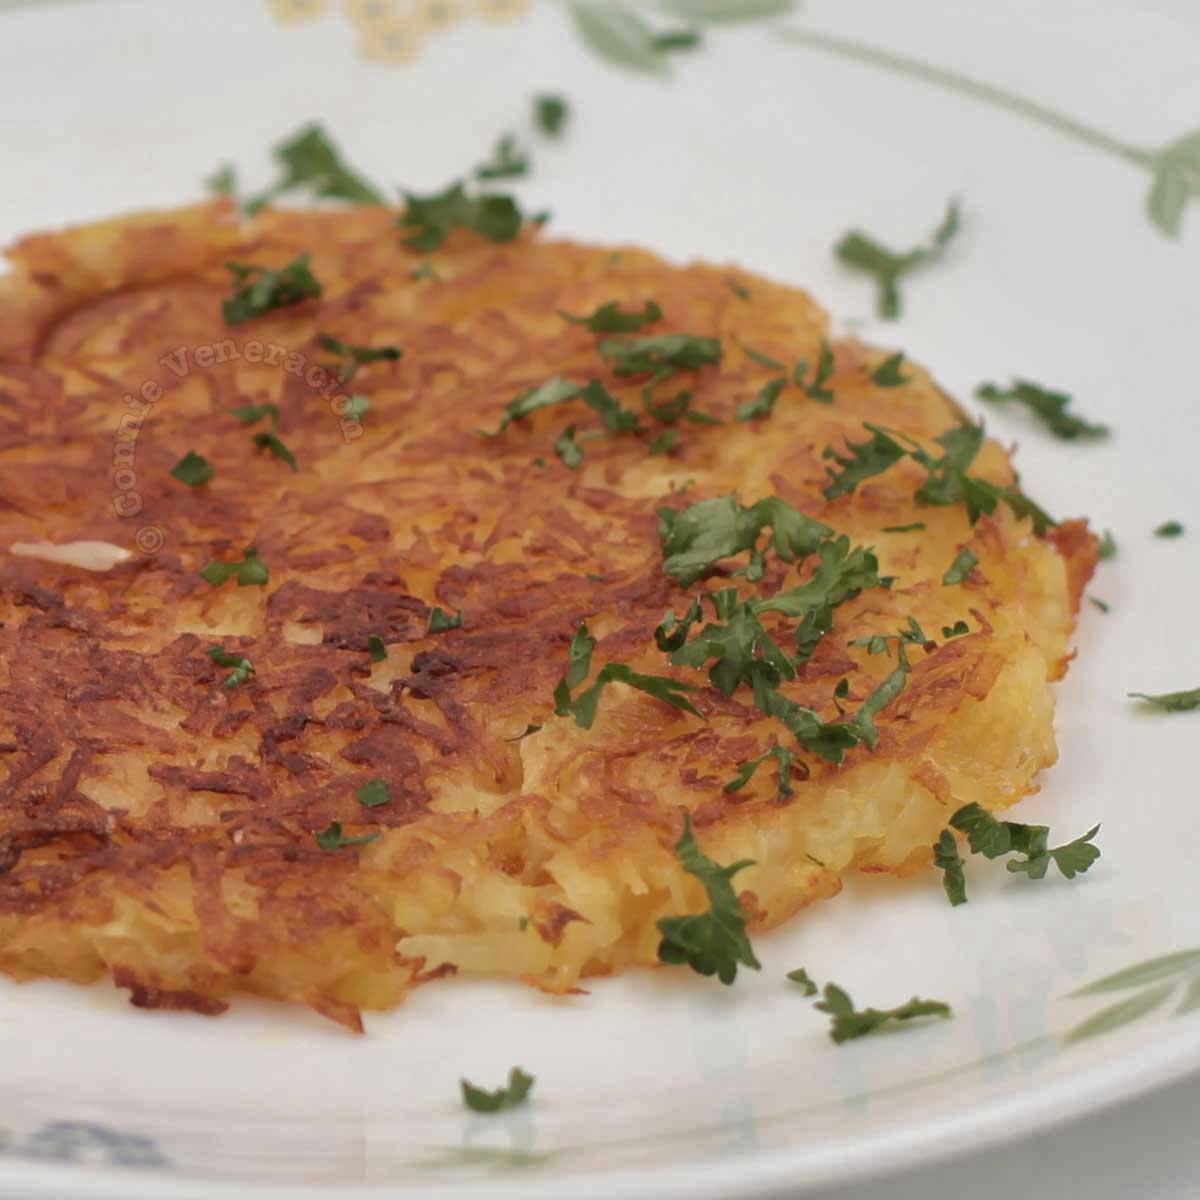 Rosti (Swiss fried grated potatoes) garnished with parsley